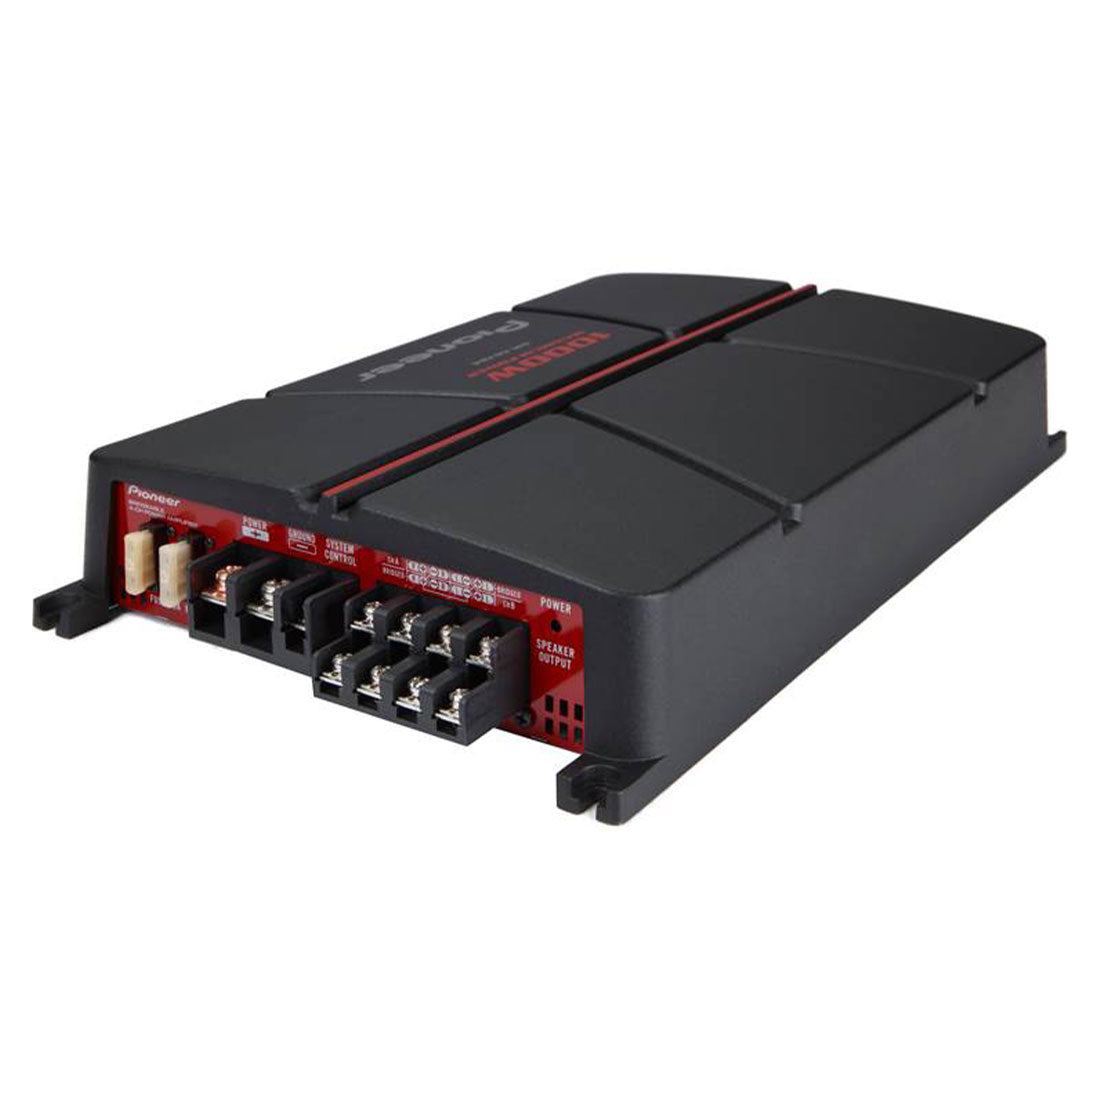 Pioneer GM-A6704 4-Channel Bridgeable Amplifier with Bass Boost